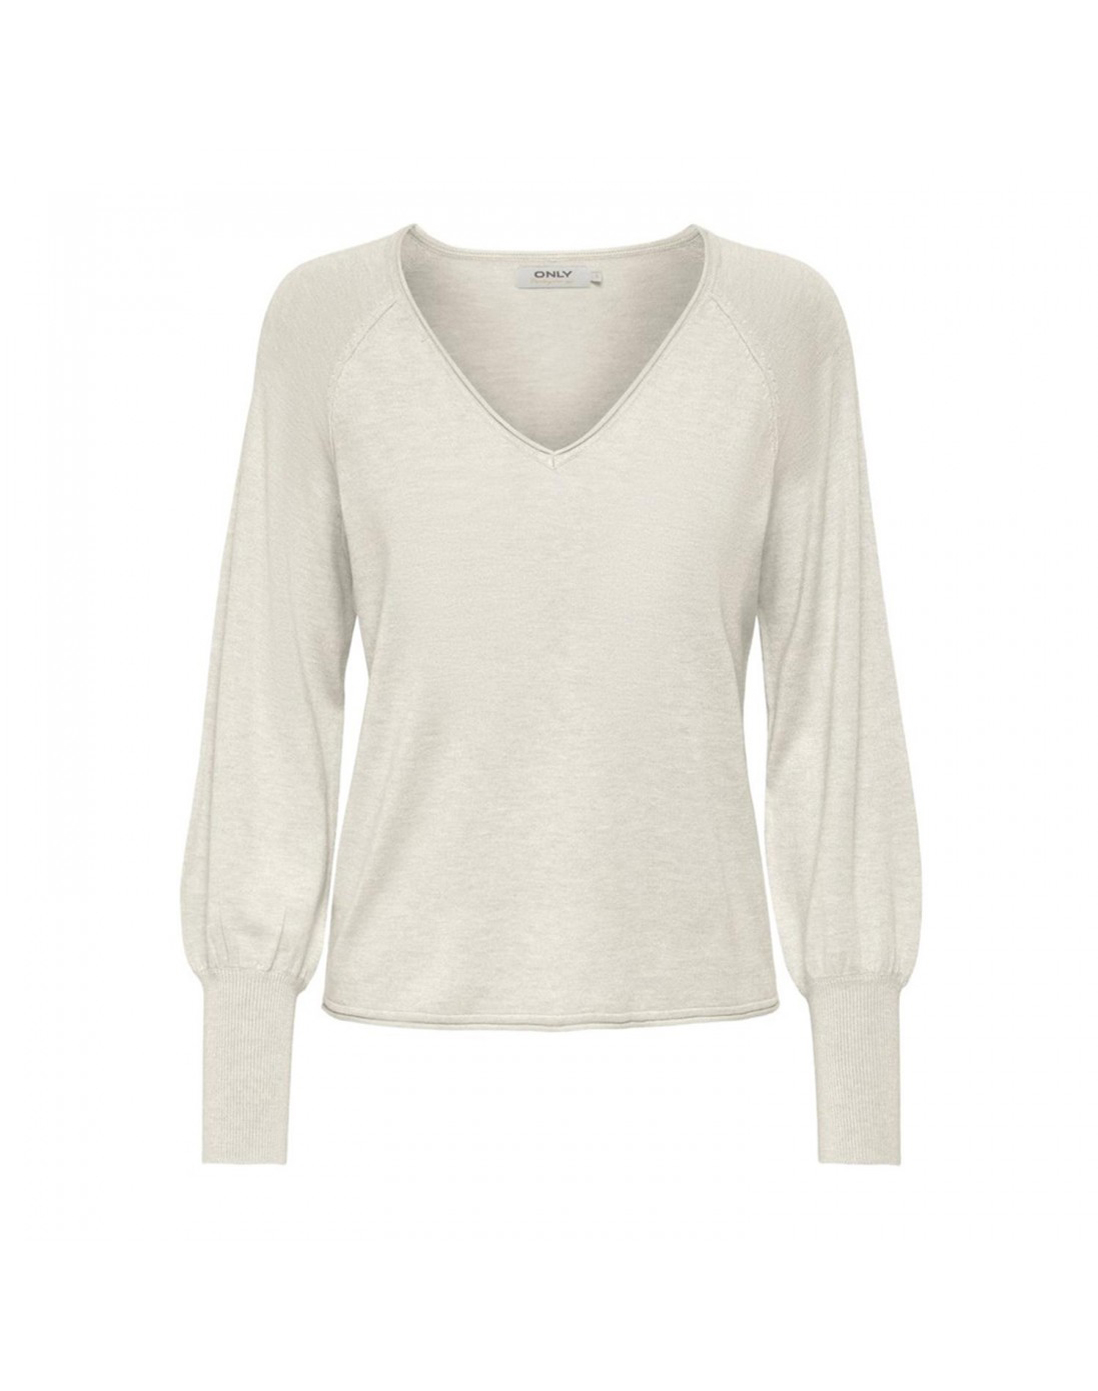 Only jersey de mujer Mila 15280078 blanco roto